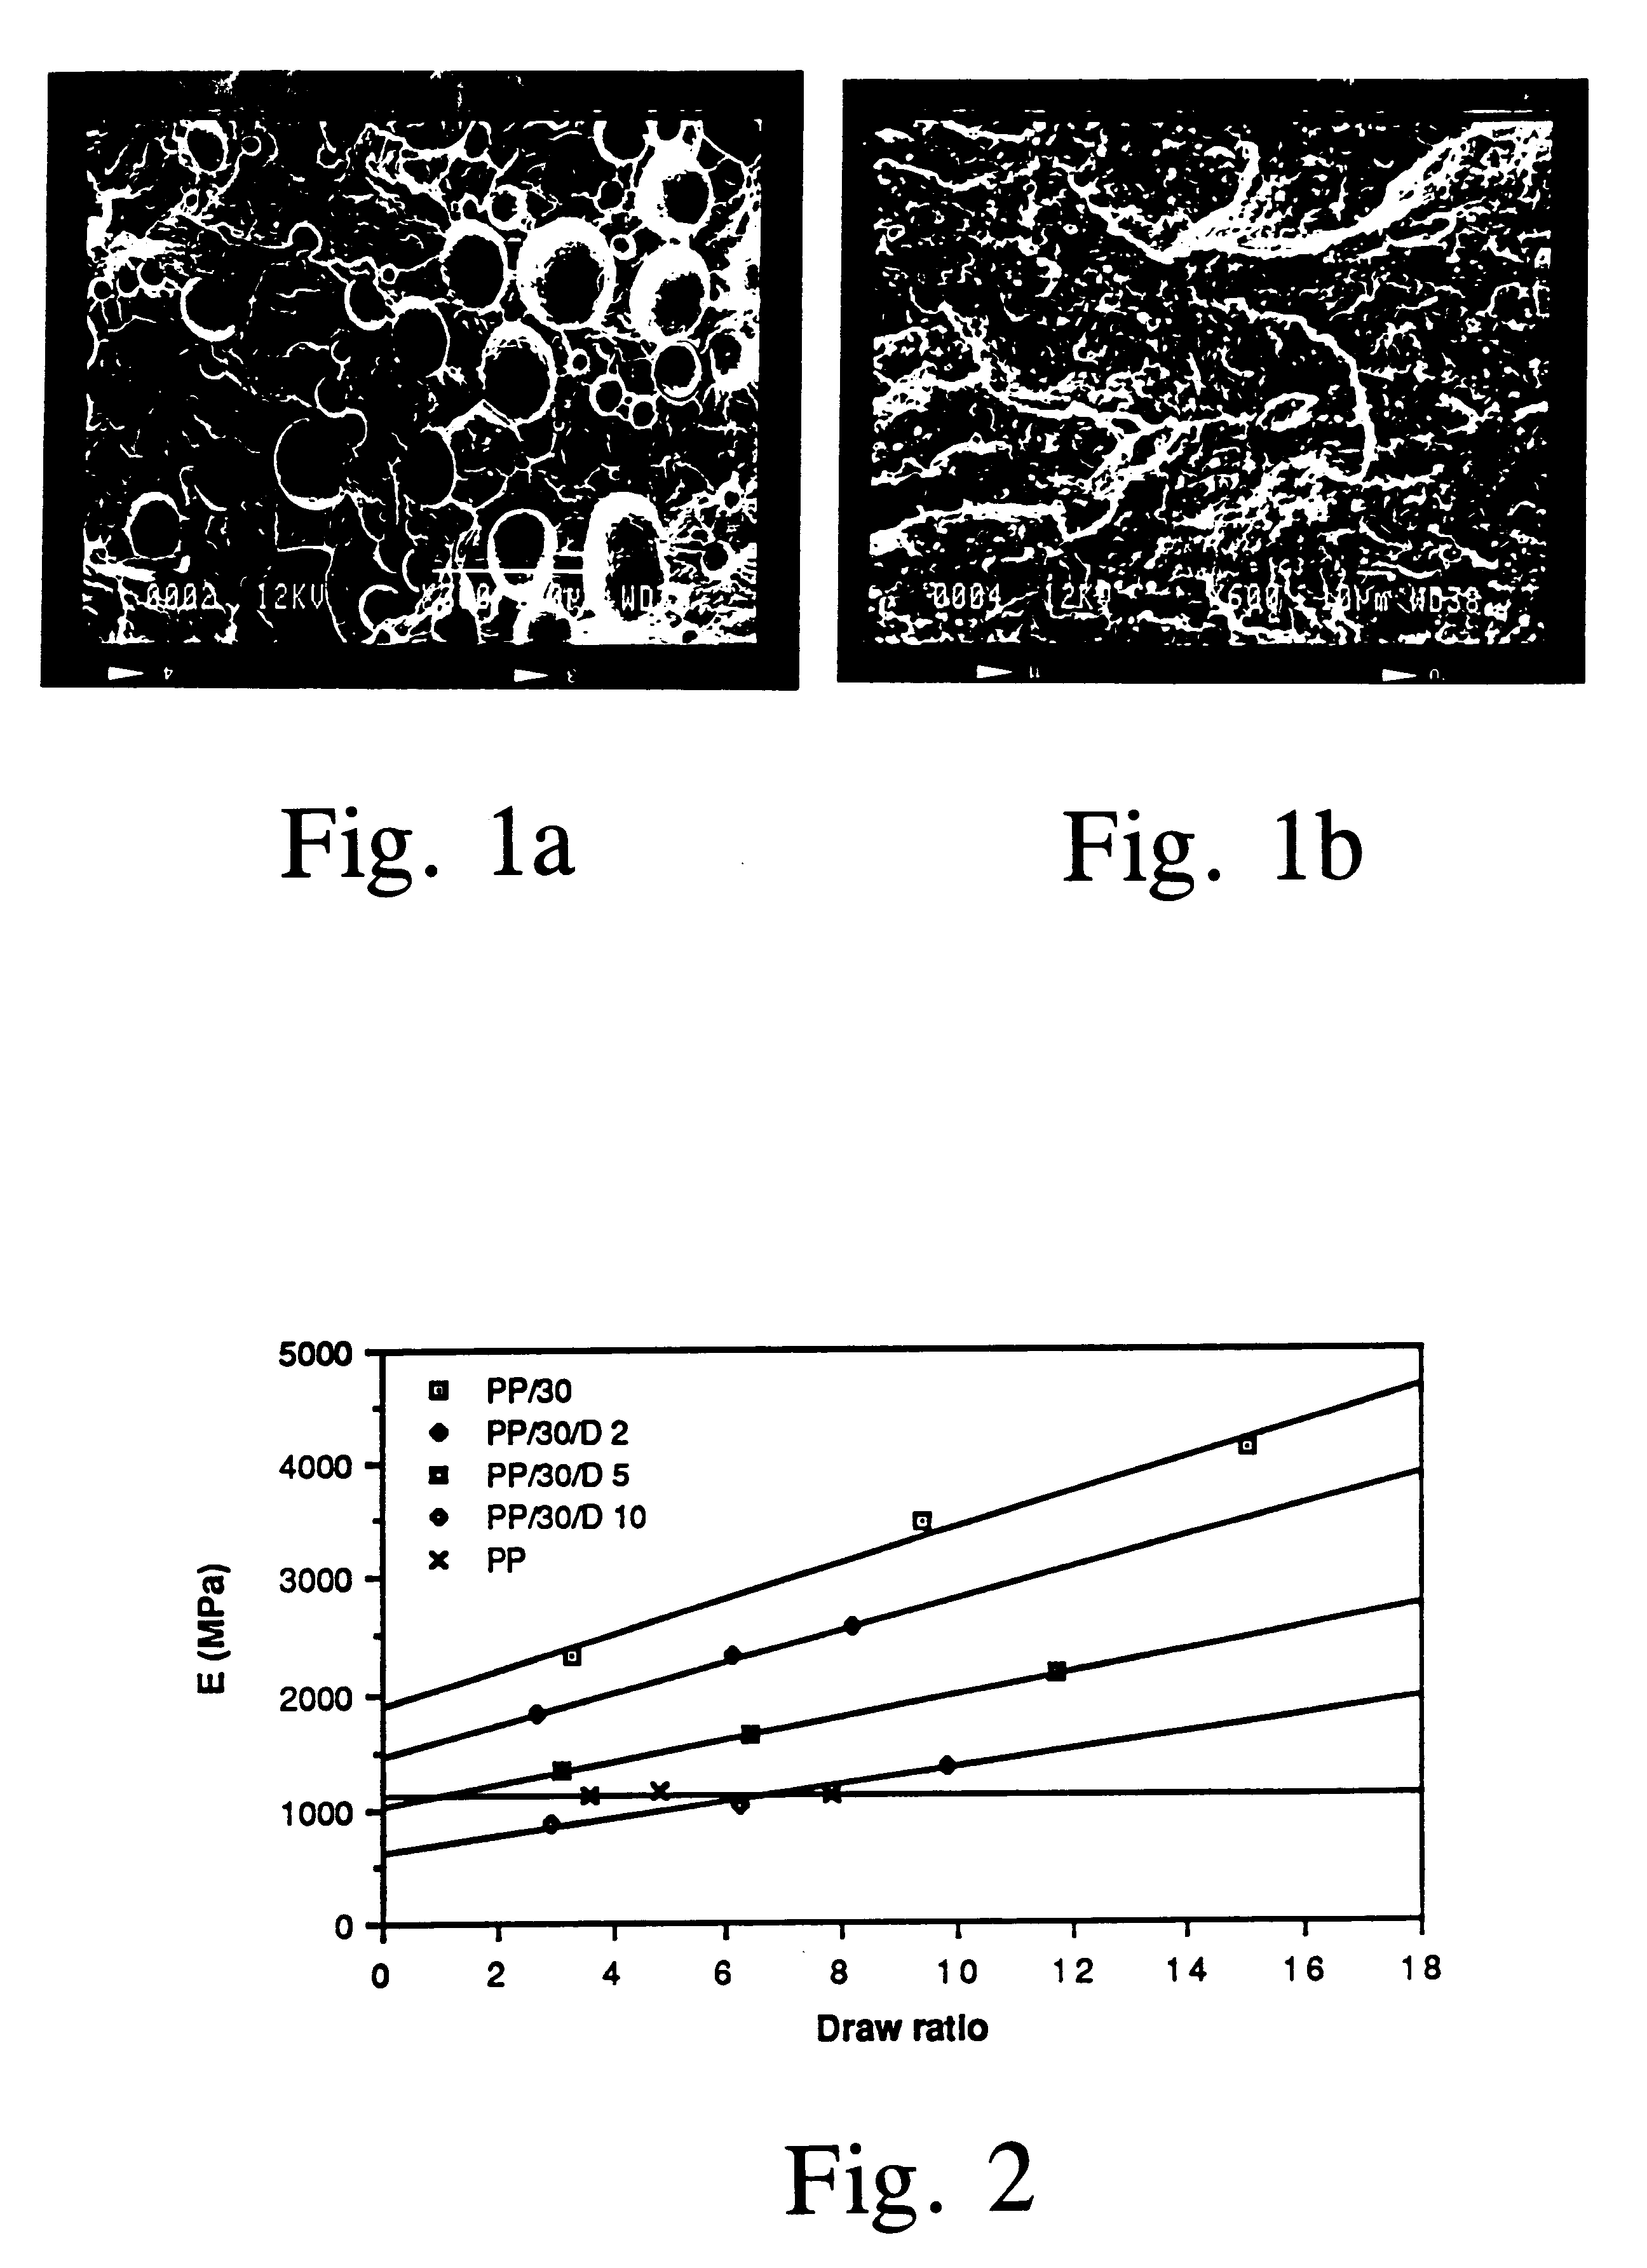 Liquid crystal polymer blends, process for the preparation thereof and products manufactured from the blends